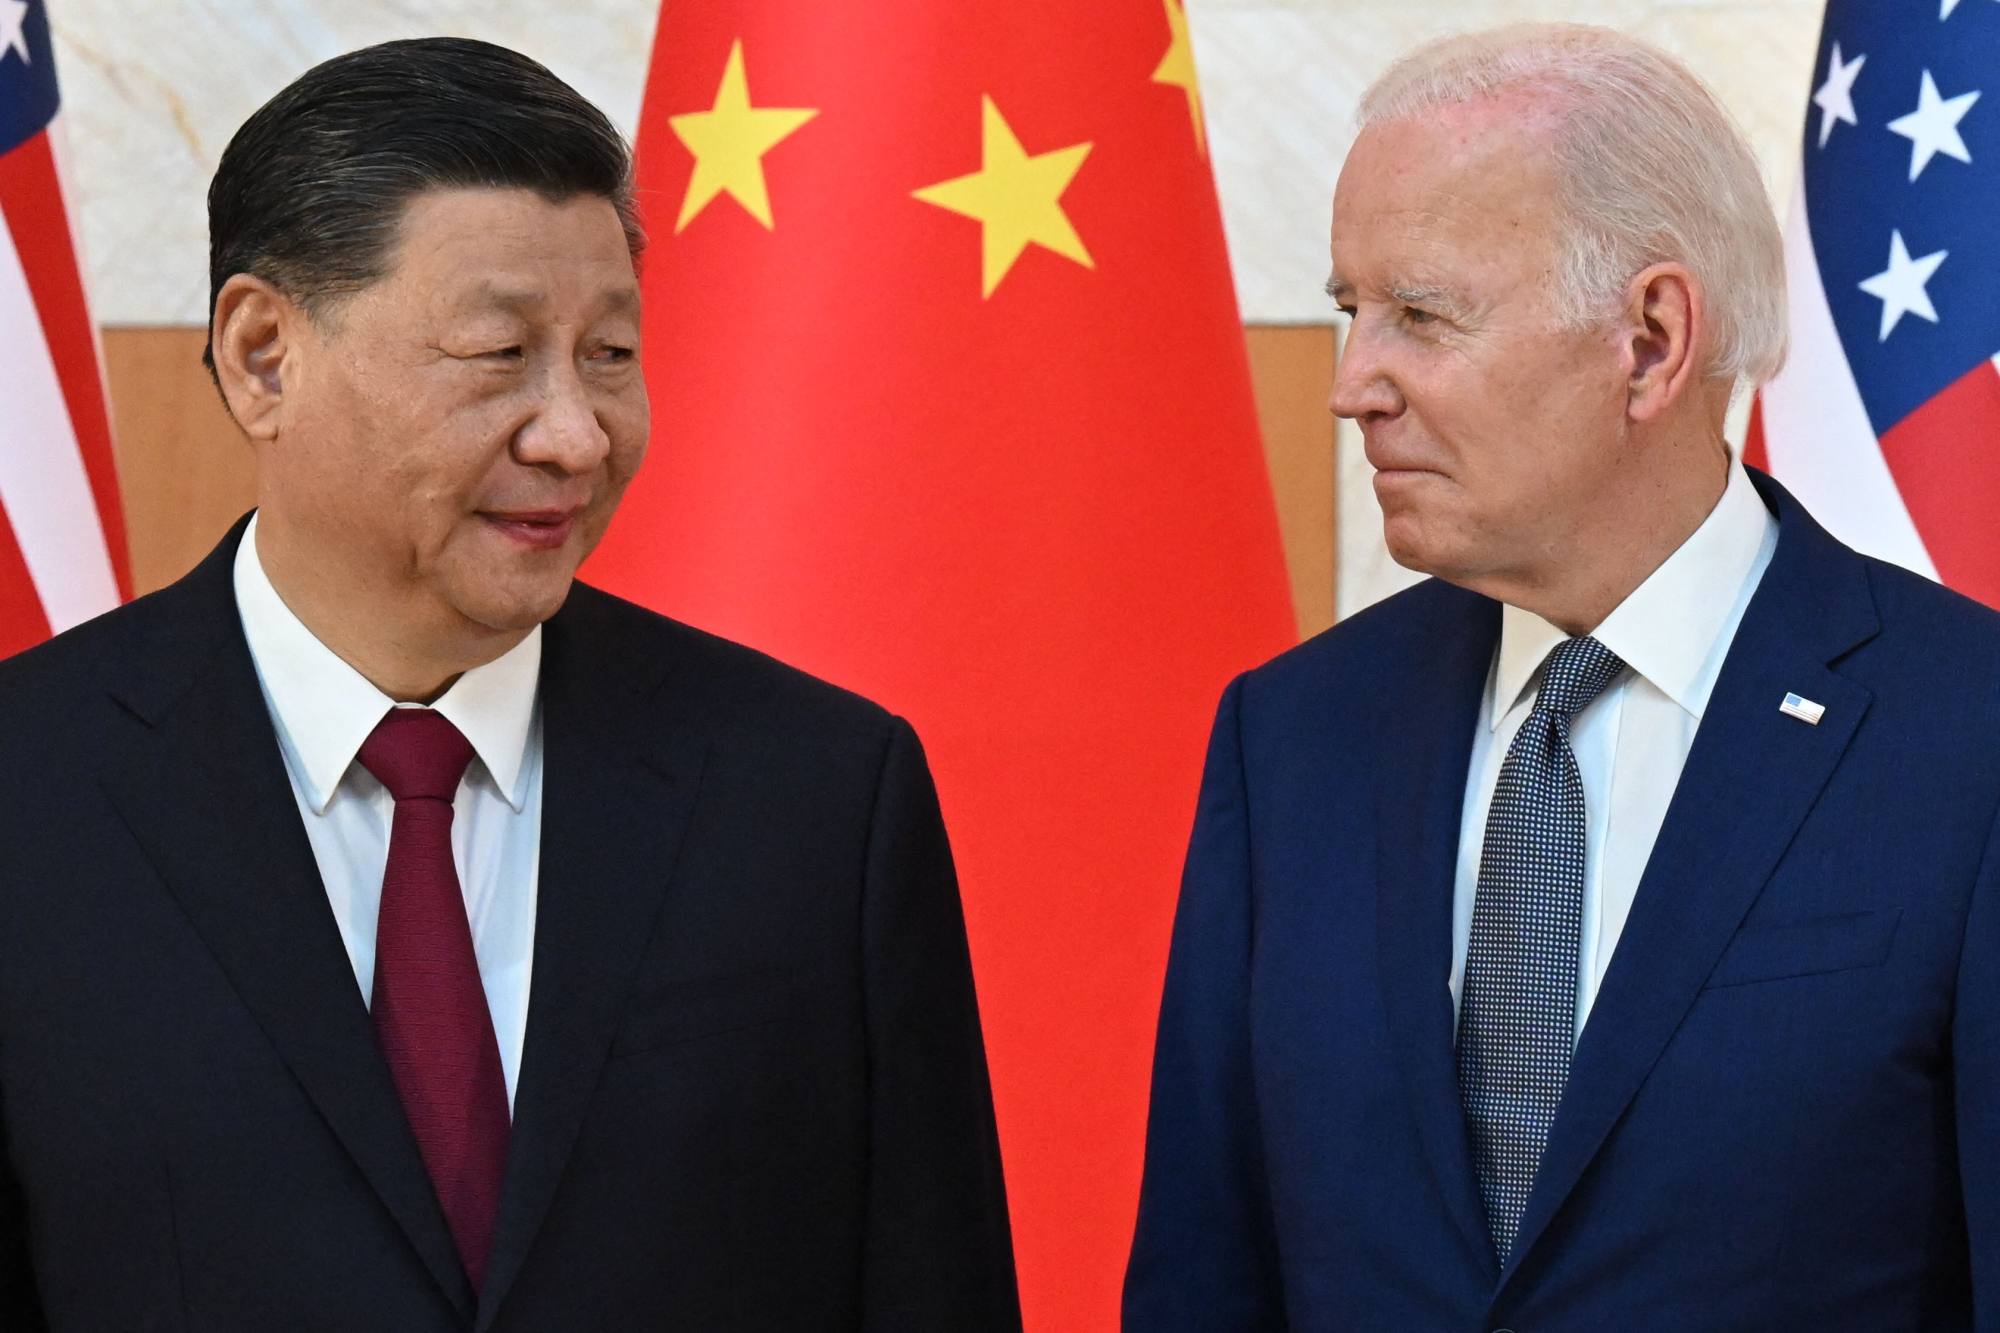 China’s Xi Jinping and US President Joe Biden meet on the sidelines of a G20 summit in Indonesia last year. Tharman said he feared there was little domestic incentive for the US to roll back its “economic warfare” with China. Photo: AFP